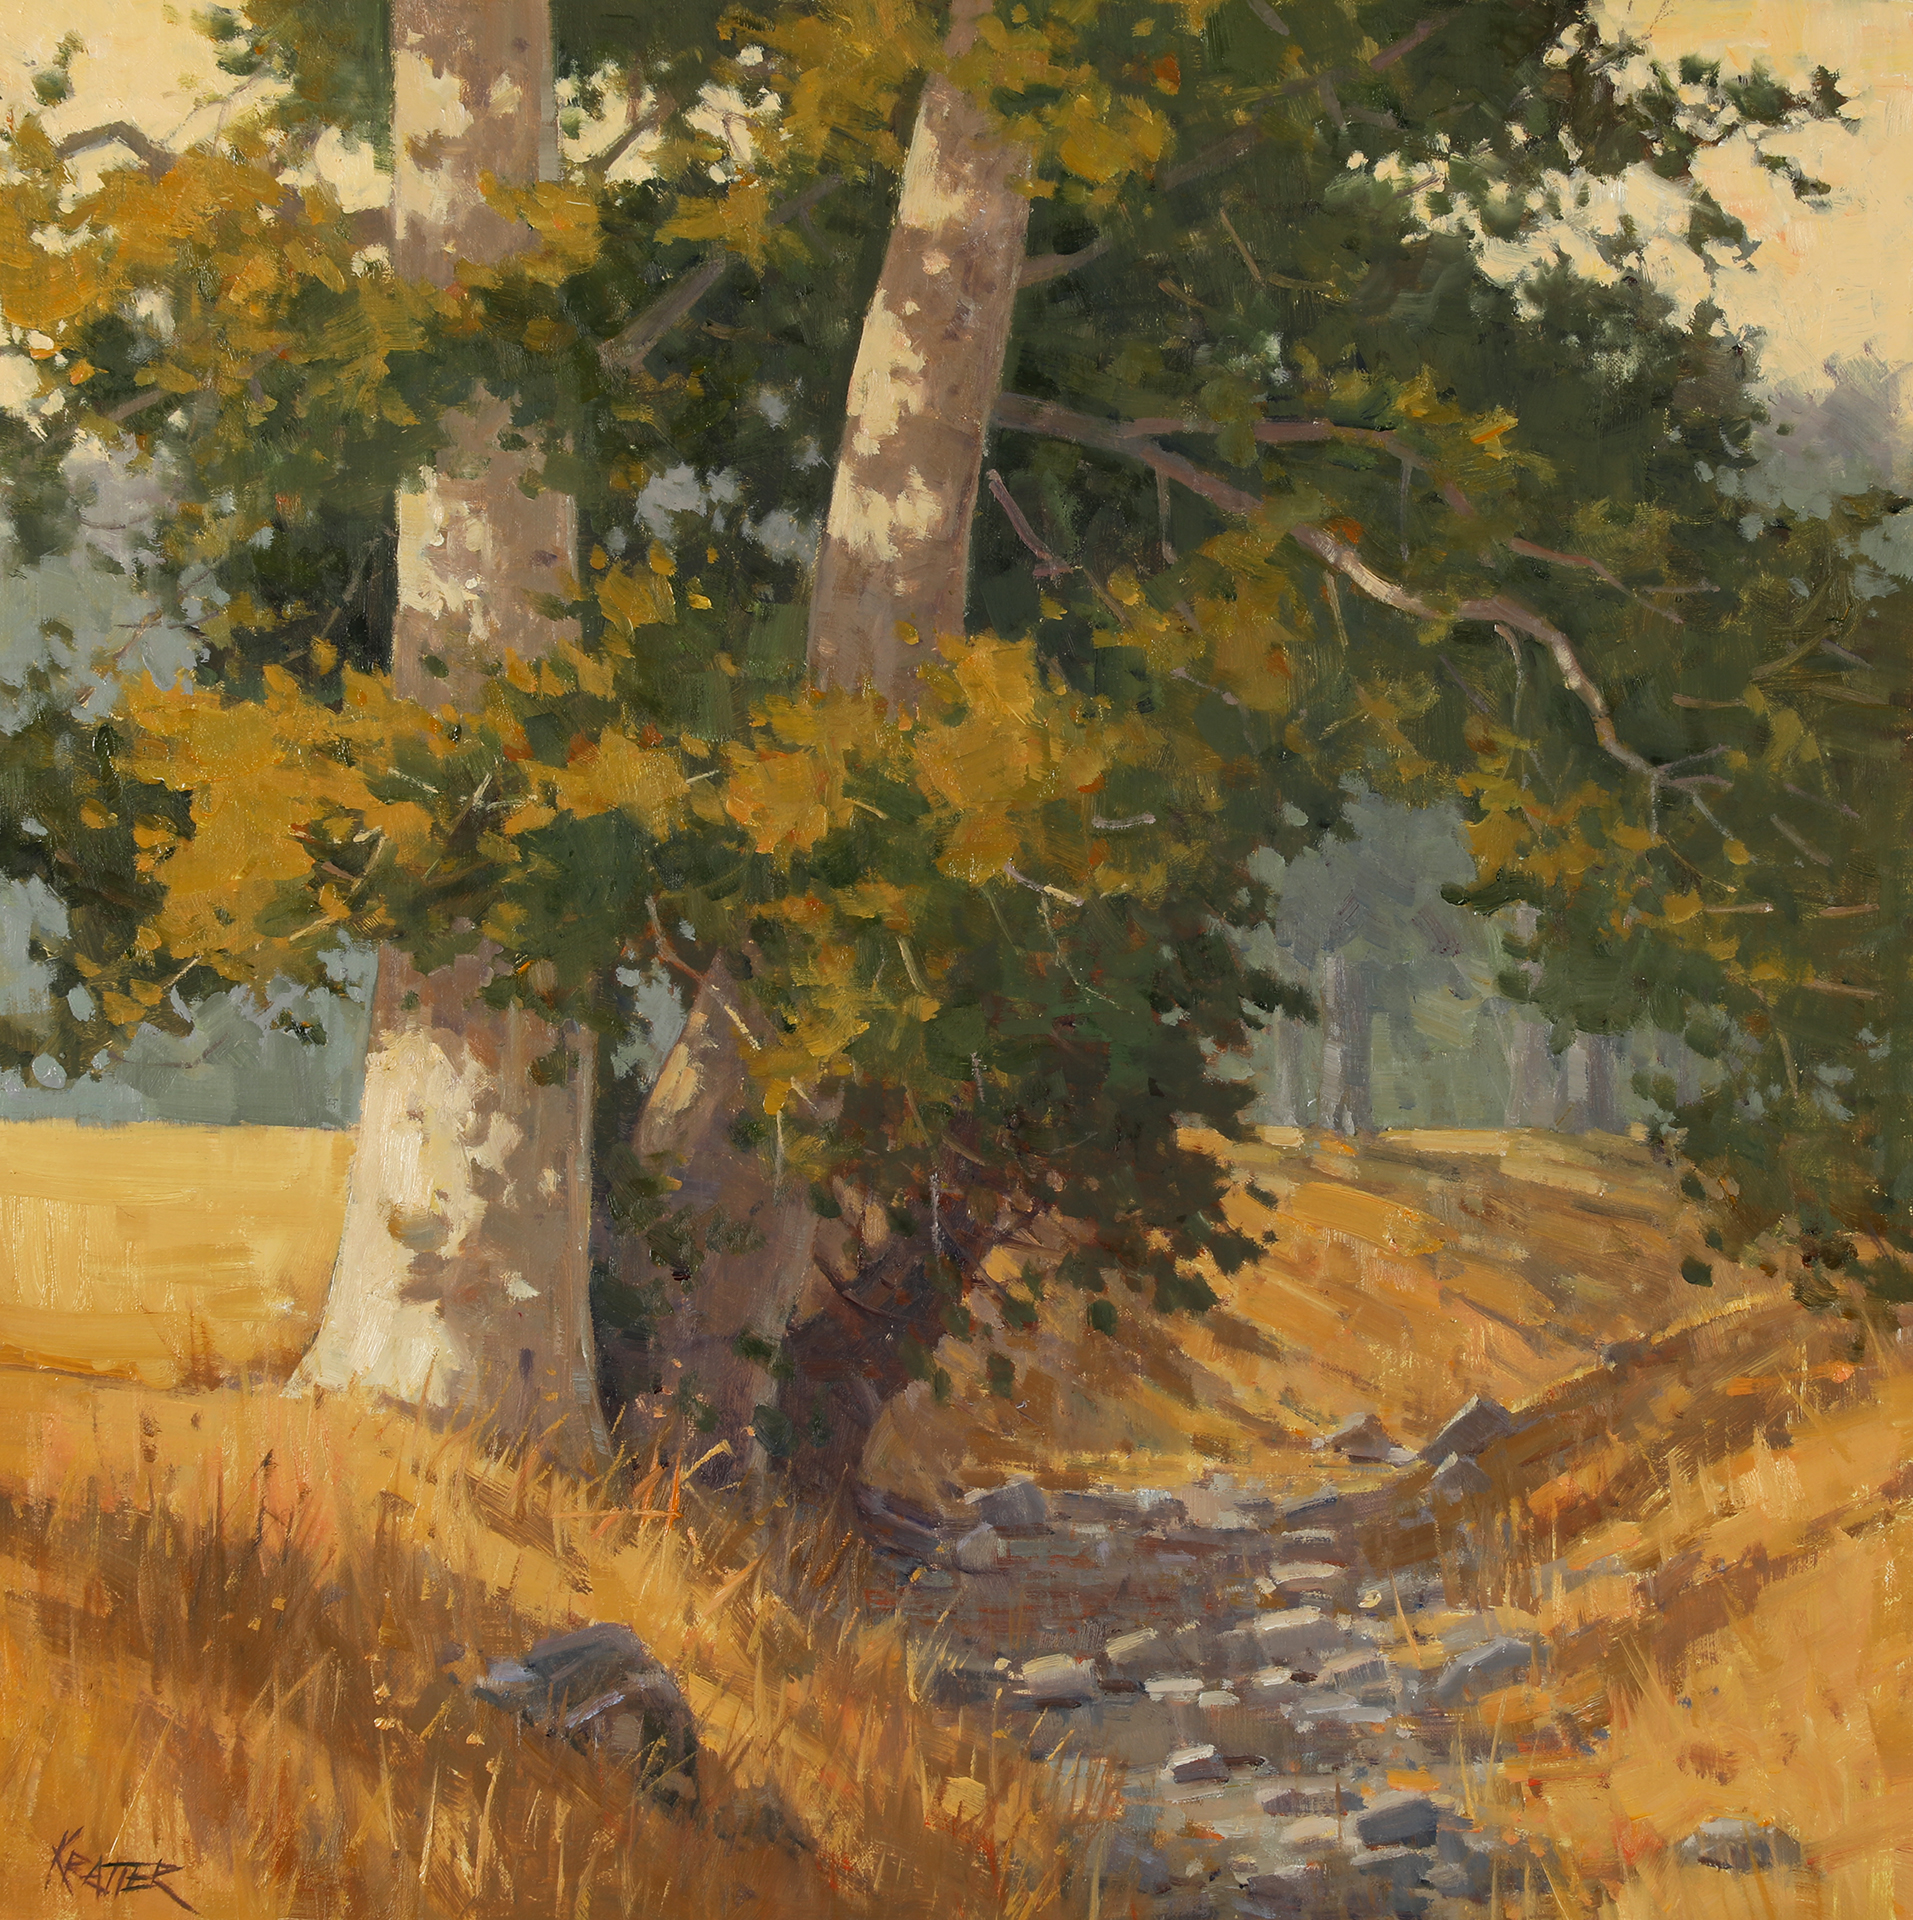 Tips for painting the landscape